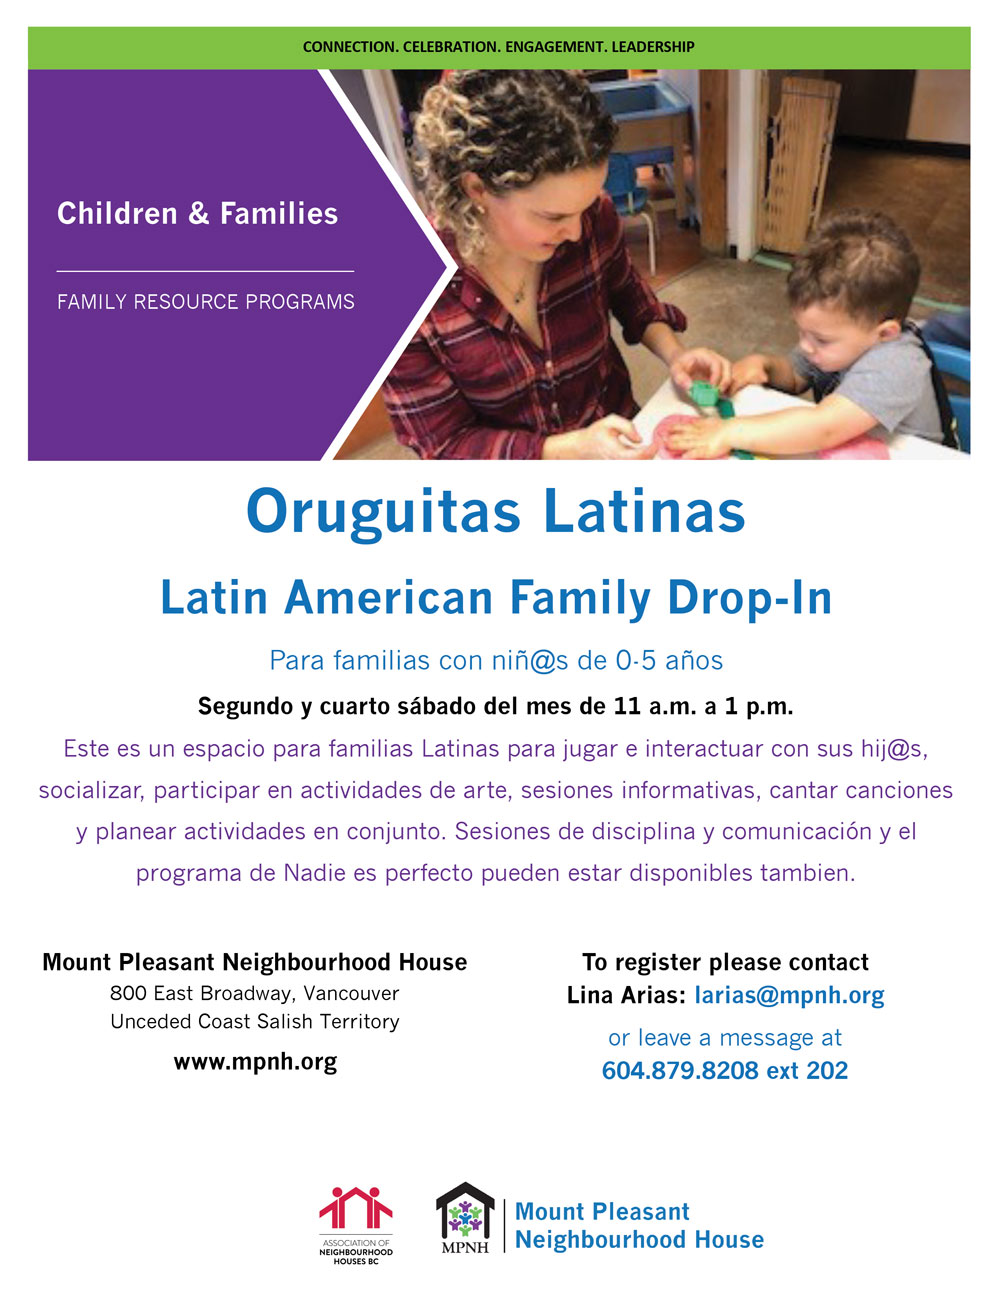 An image of the poster with program details, featuring a photo of a caregiver and child playing together.